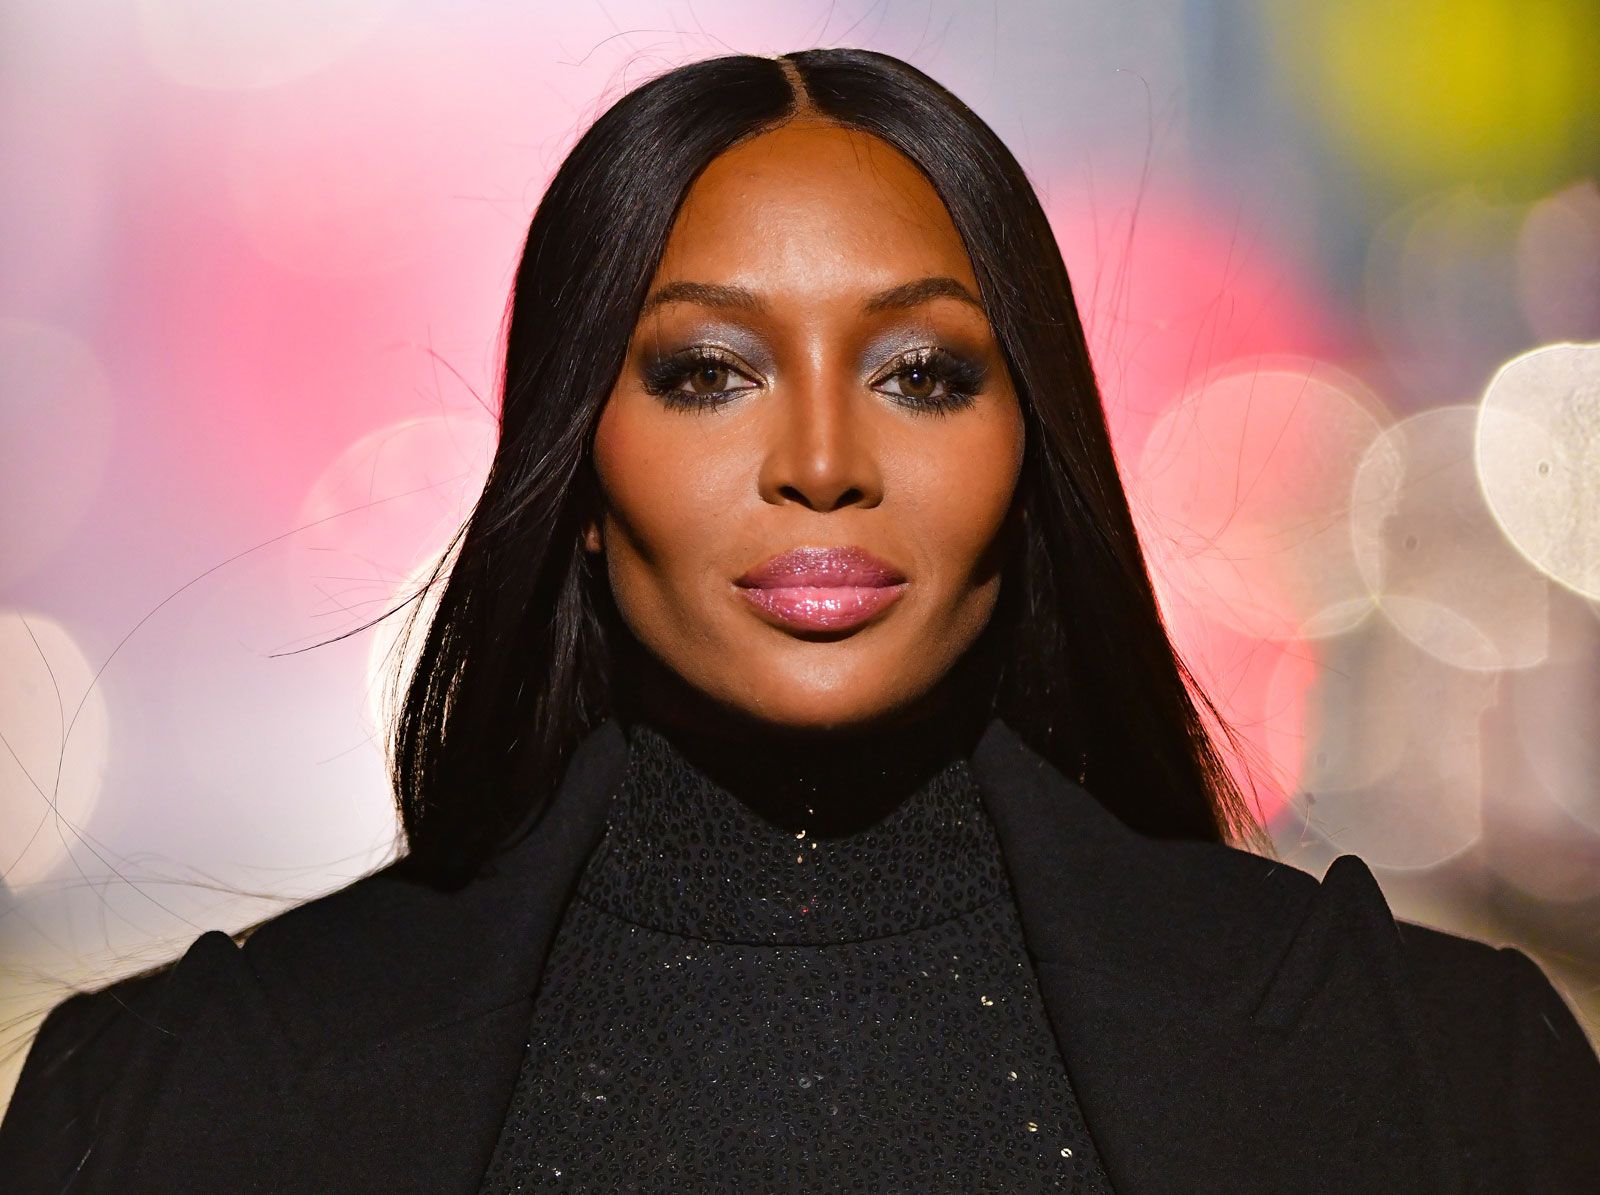 All About Naomi Campbell: Height, Weight, Bio, and More